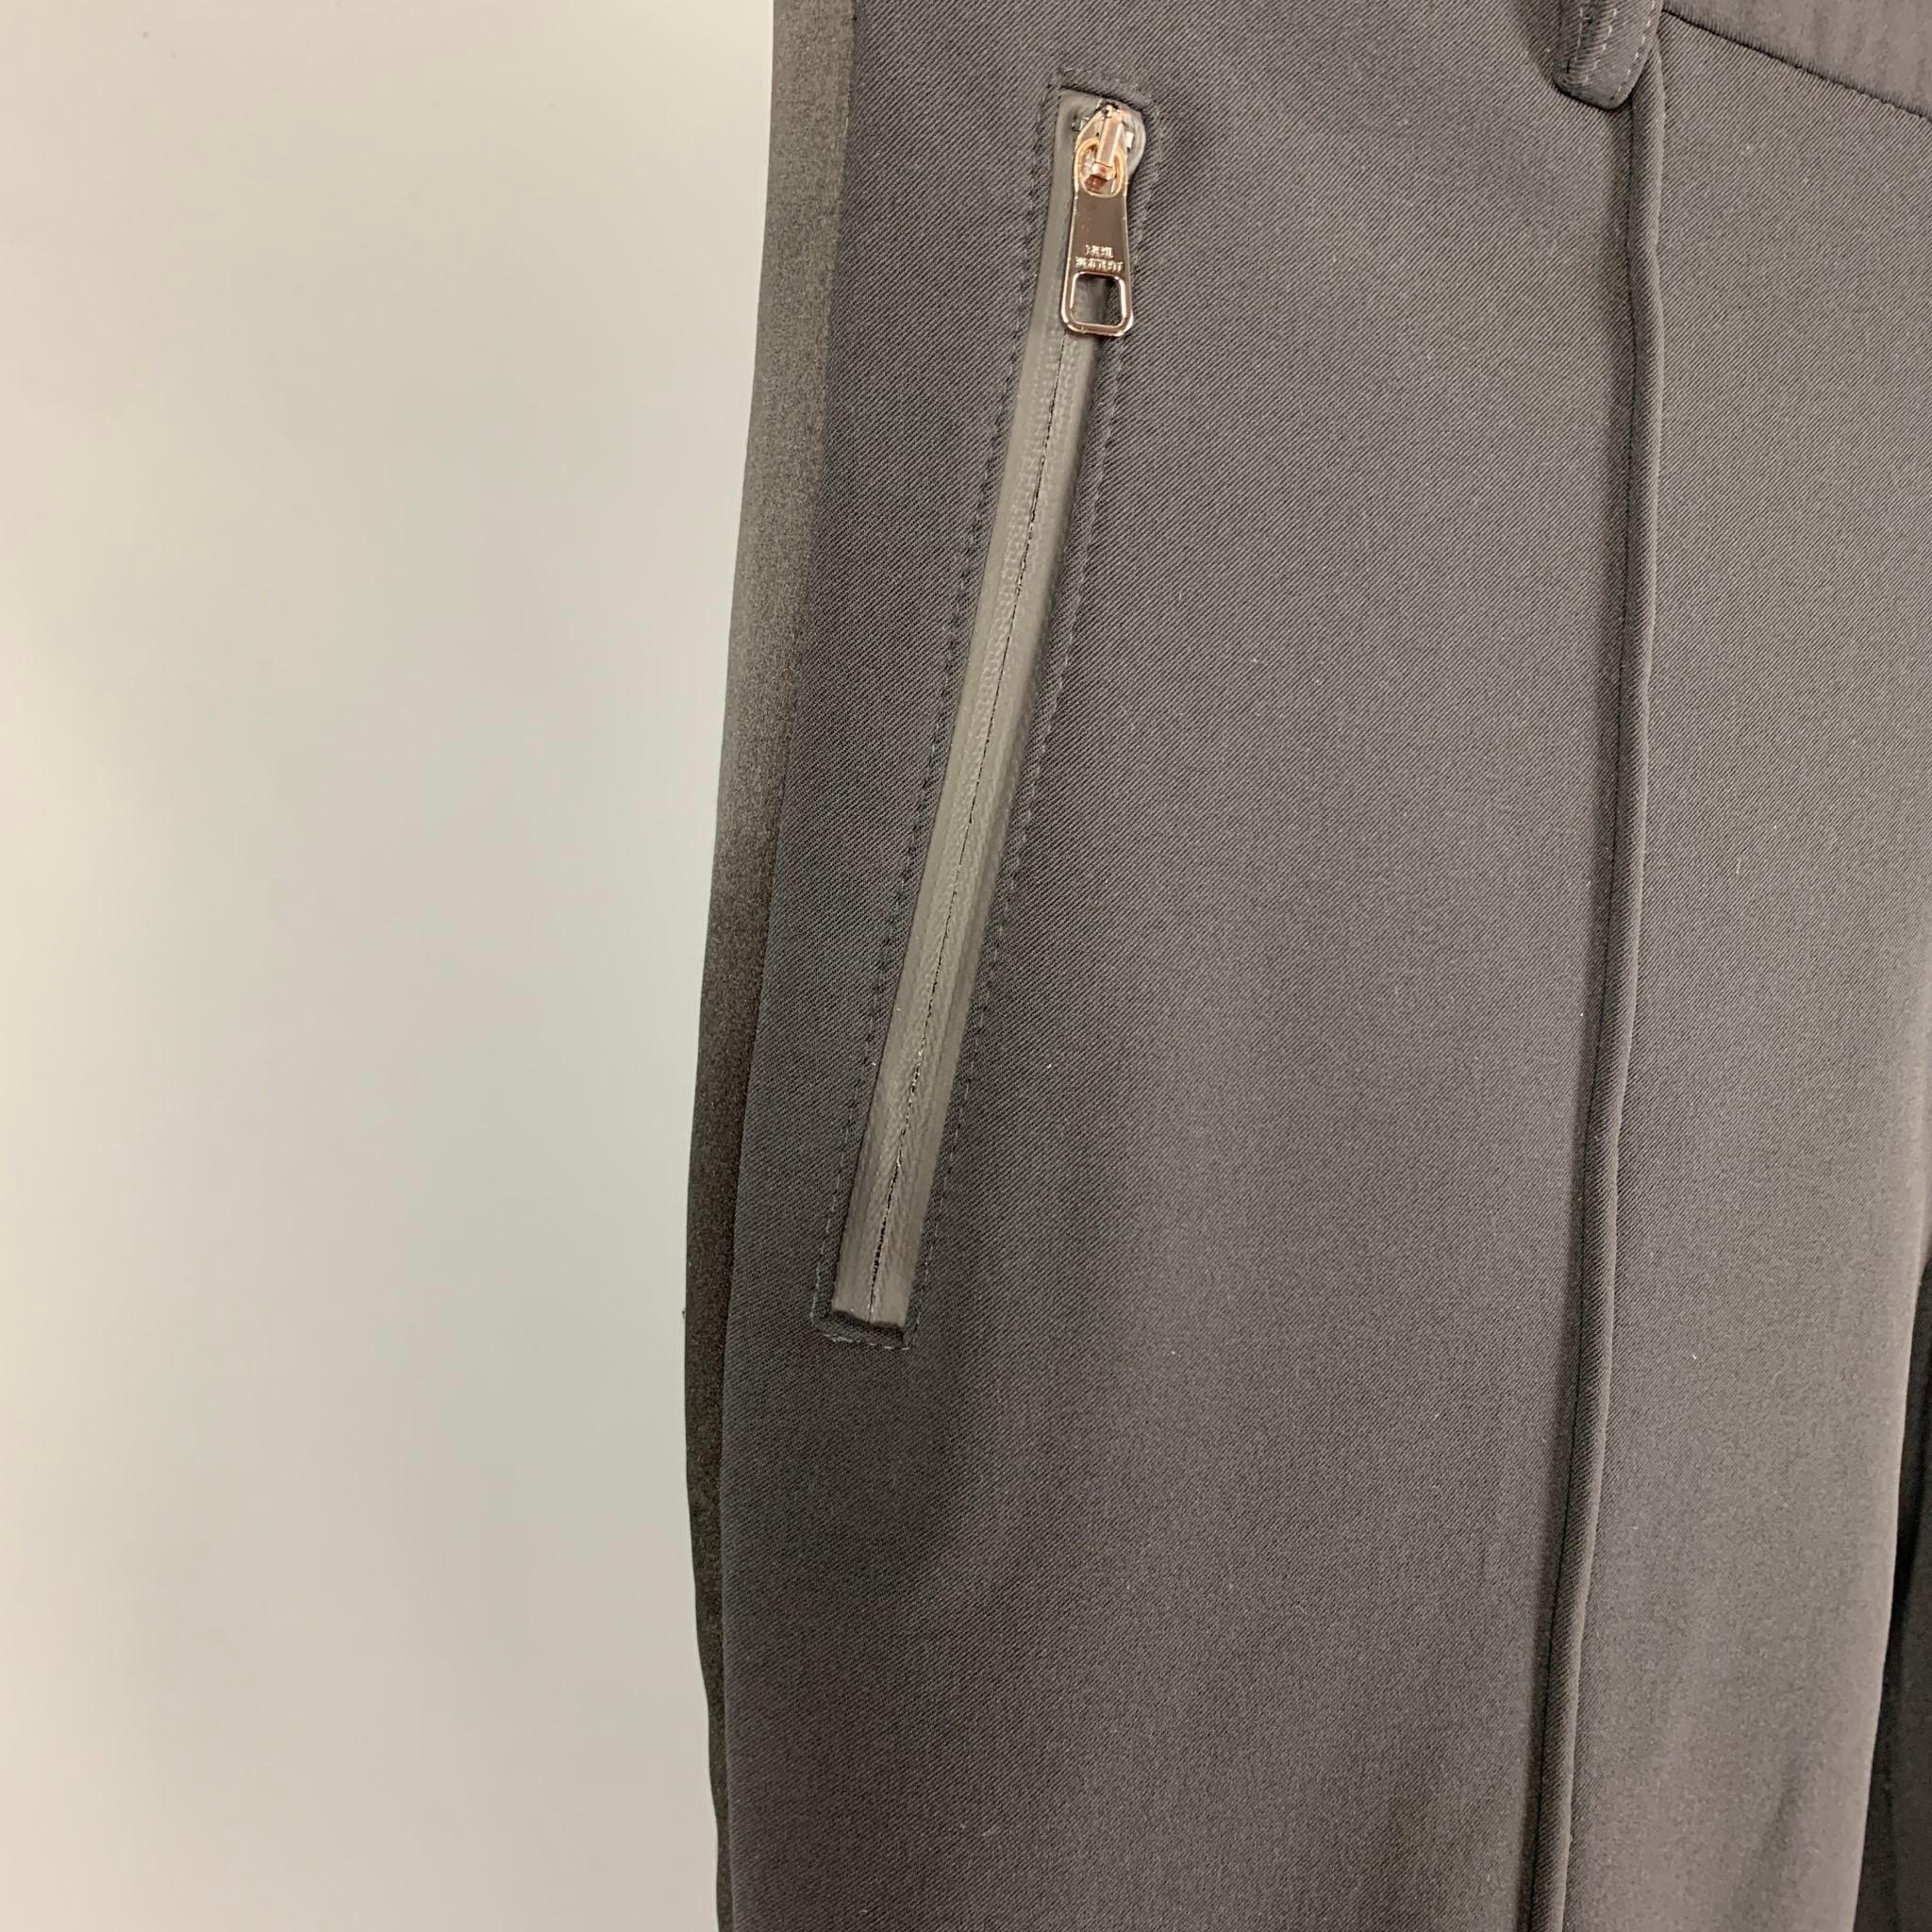 NEIL BARRETT dress pants comes in a black material featuring a skinny fit, tuxedo stripe, pleated, zipper pockets, silver tone hardware, front tab, and a zip fly closure. Made in Italy. 

Very Good Pre-Owned Condition. Fabric tag not